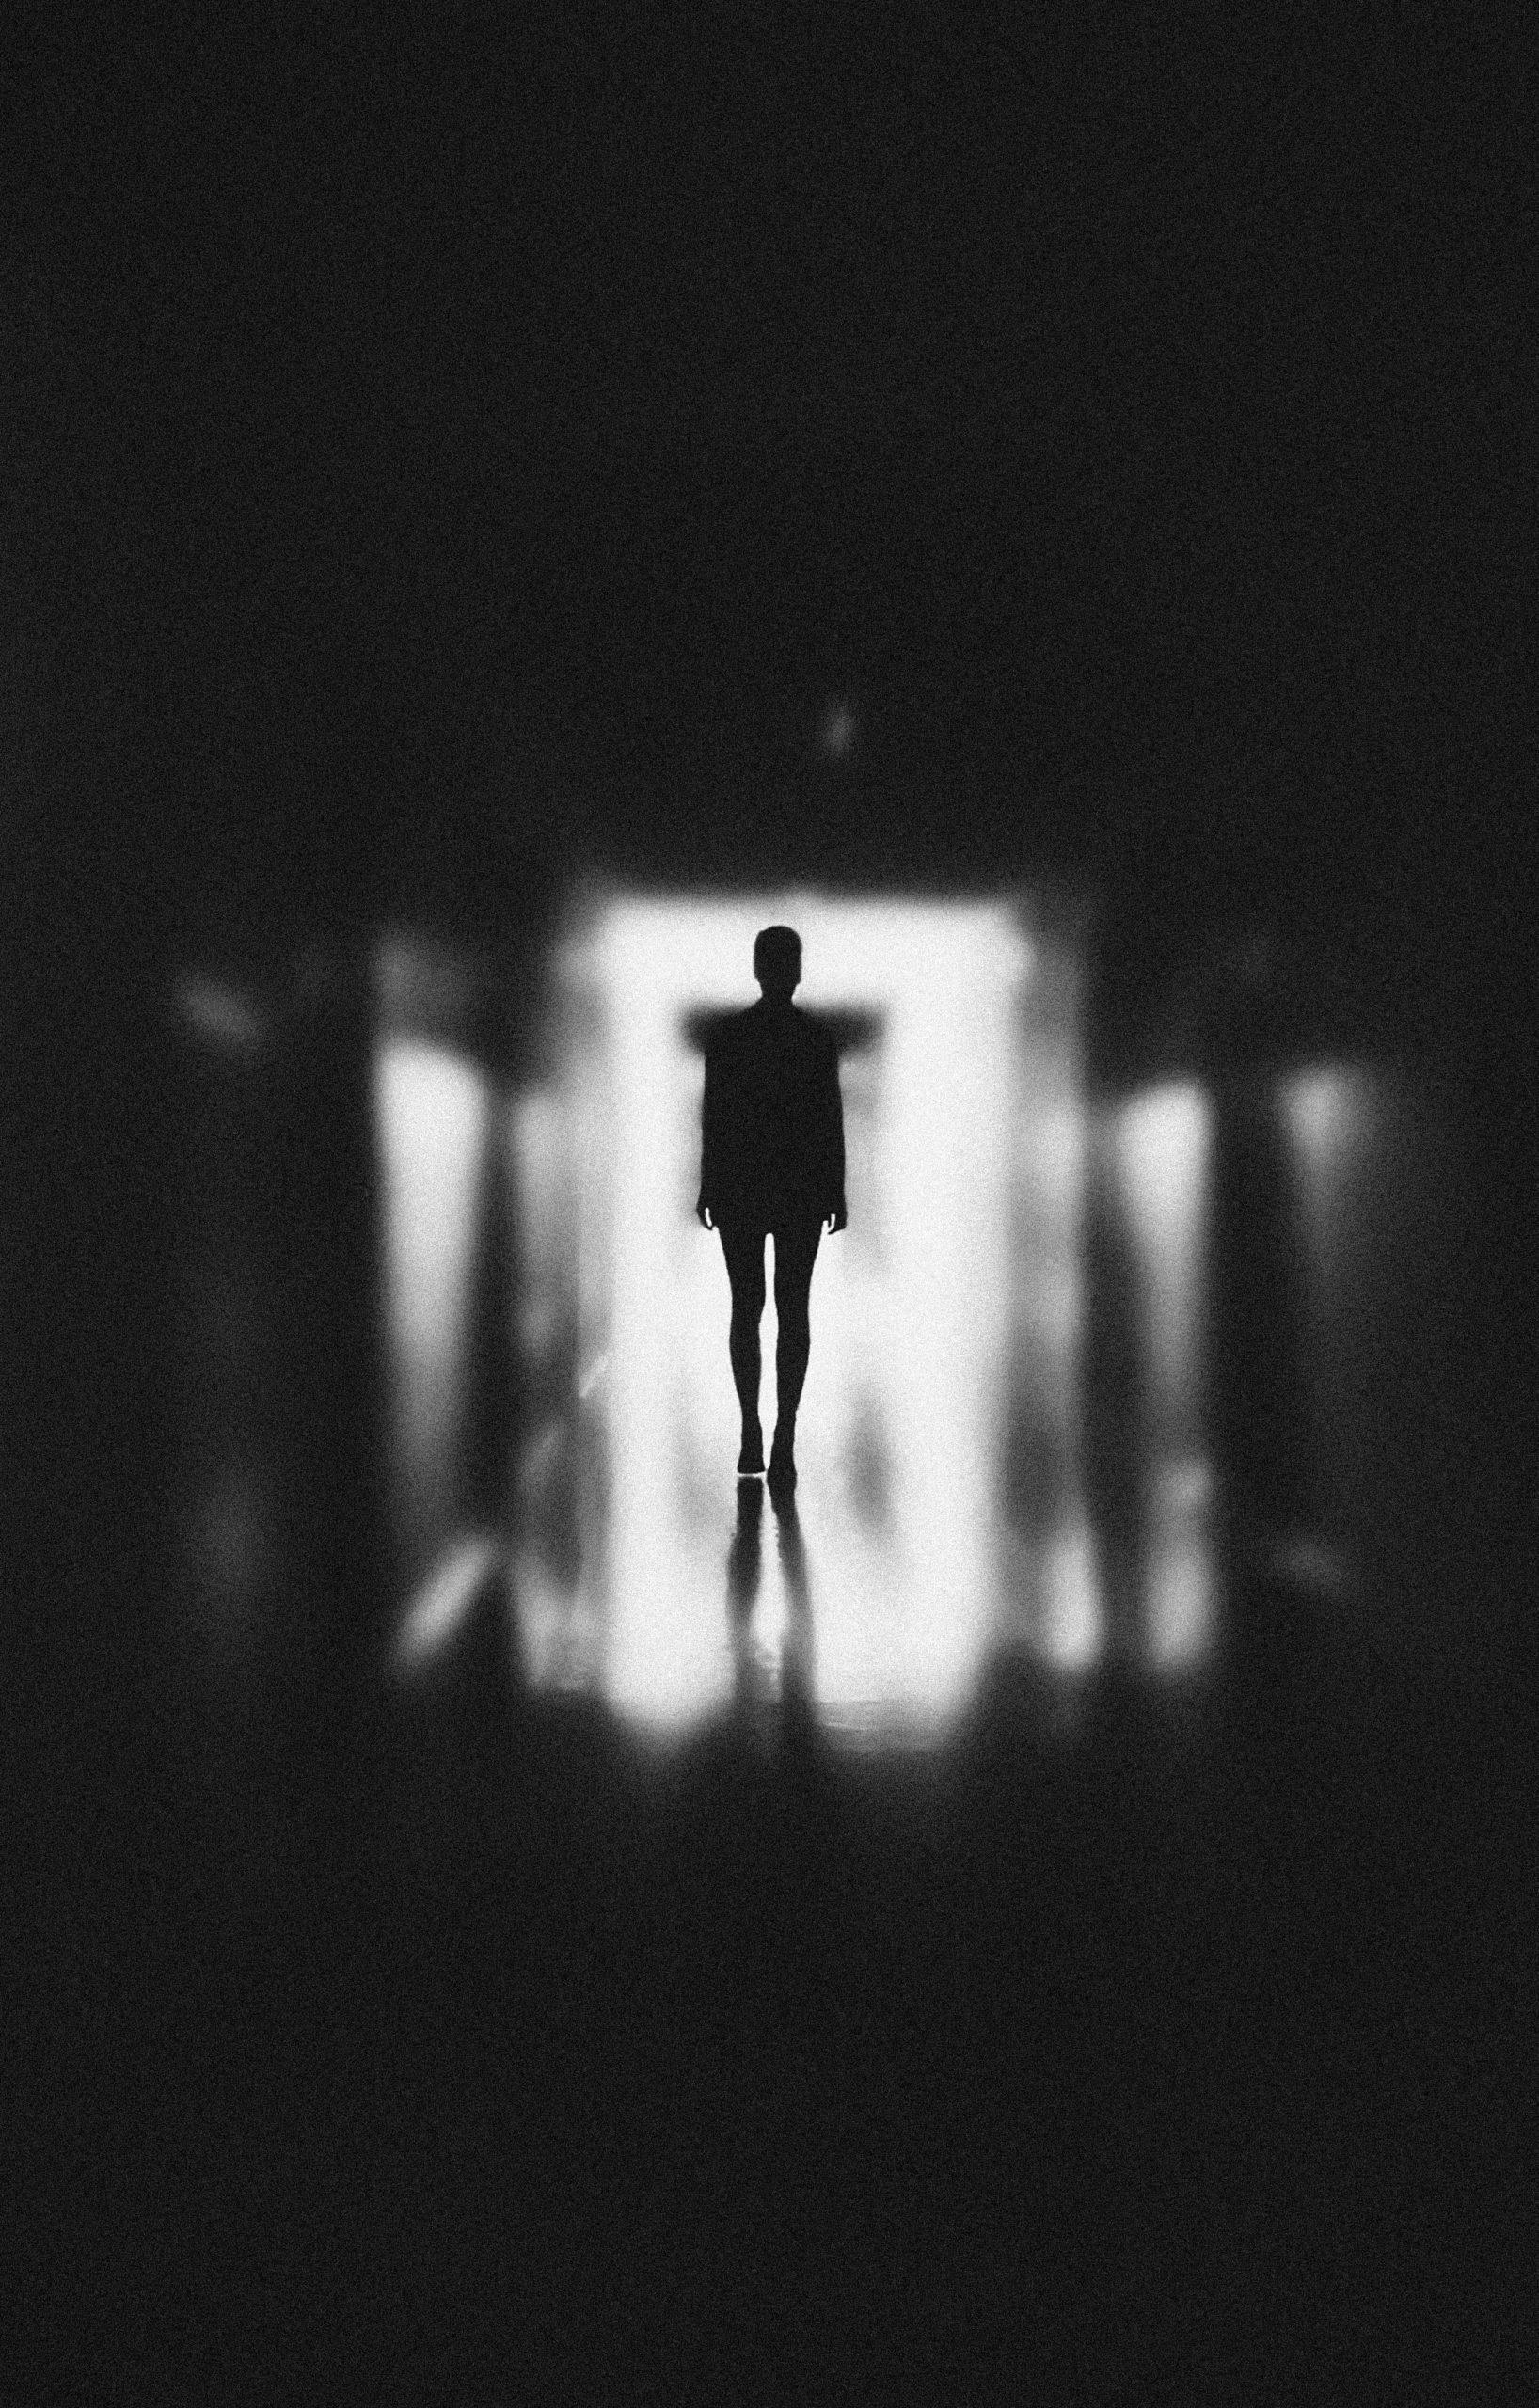 Monochrome photo of person standing in a hallway